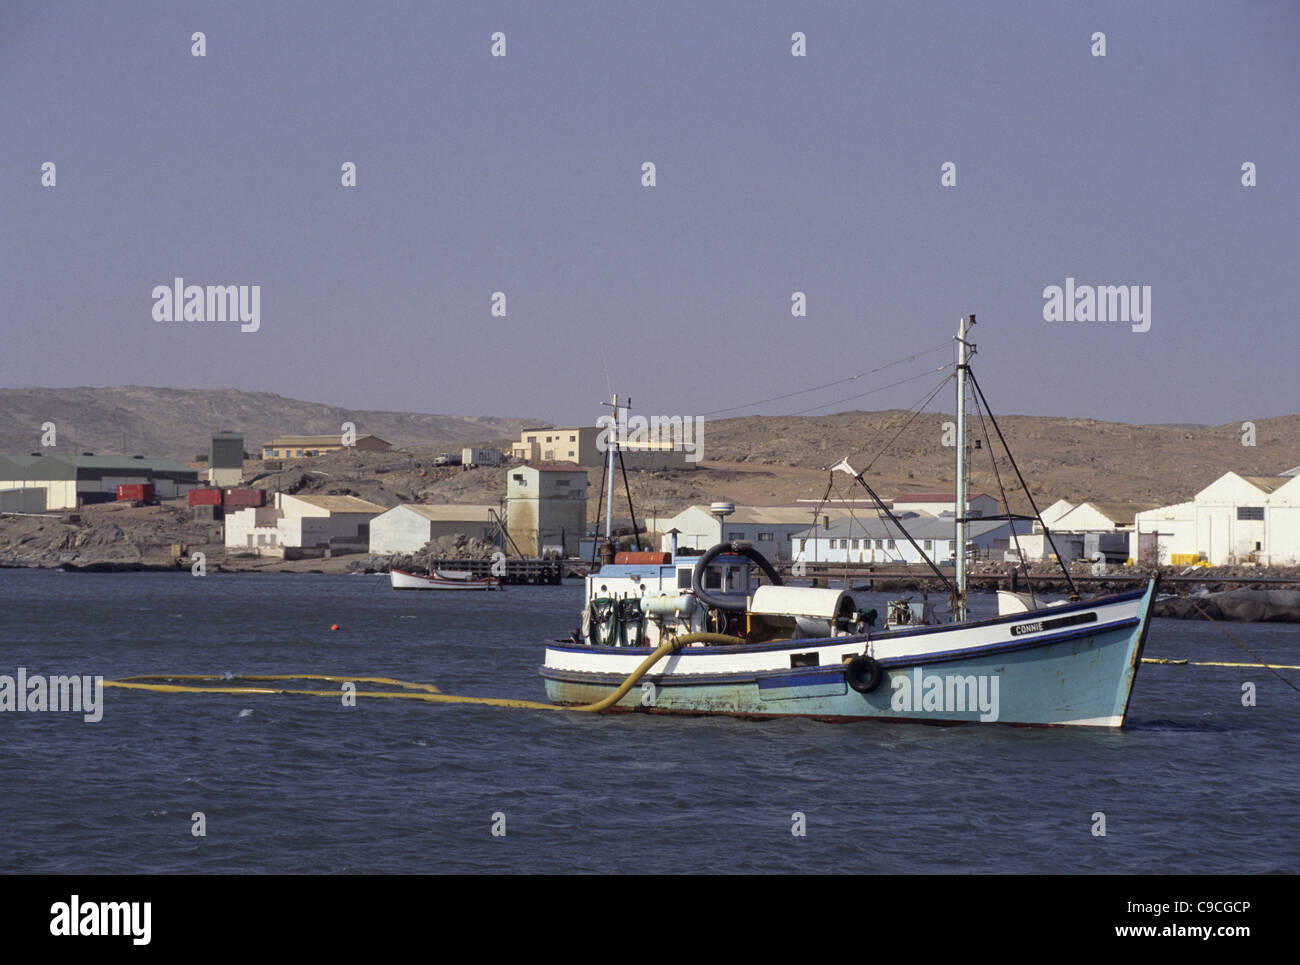 Namibia, Southern Africa, Diamond diving boat off the coast of the German town of Luderitz. Stock Photo